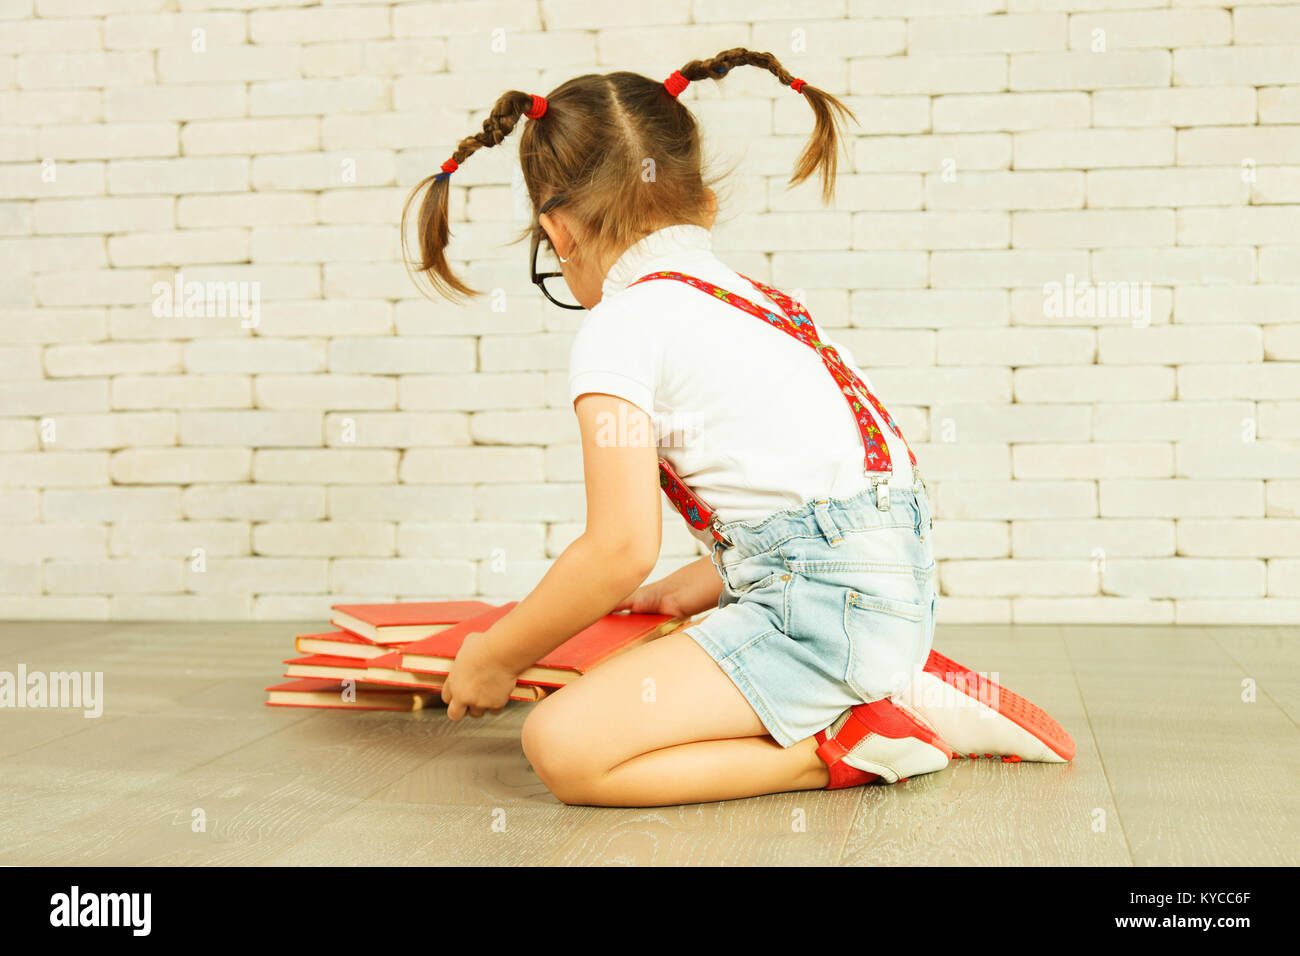 Preschooler girl with pigtails sitting on the floor Stock Photo